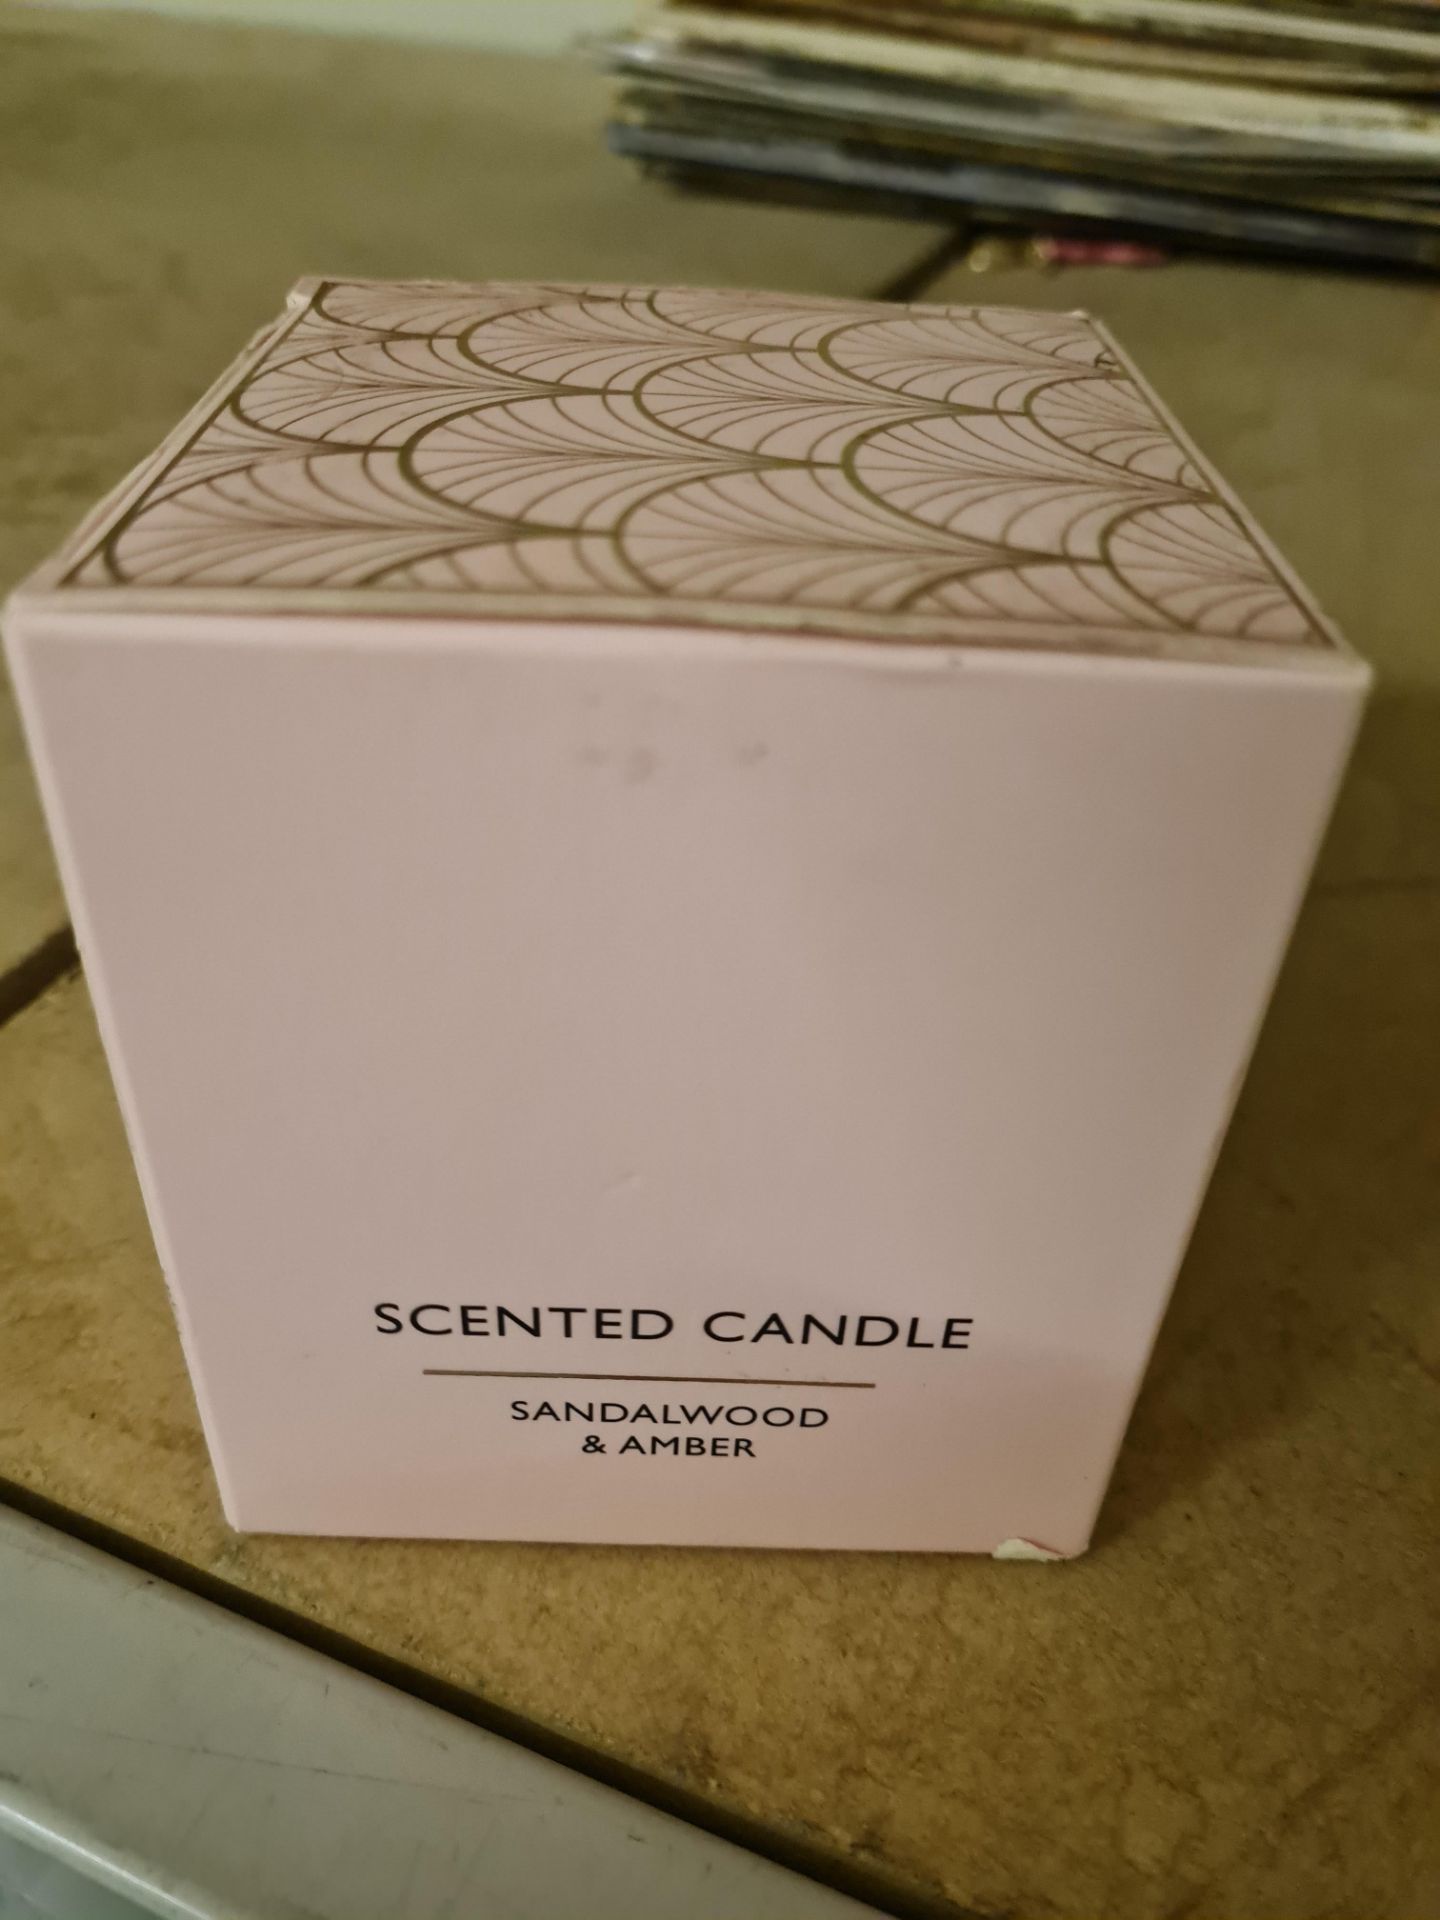 New Scented candle